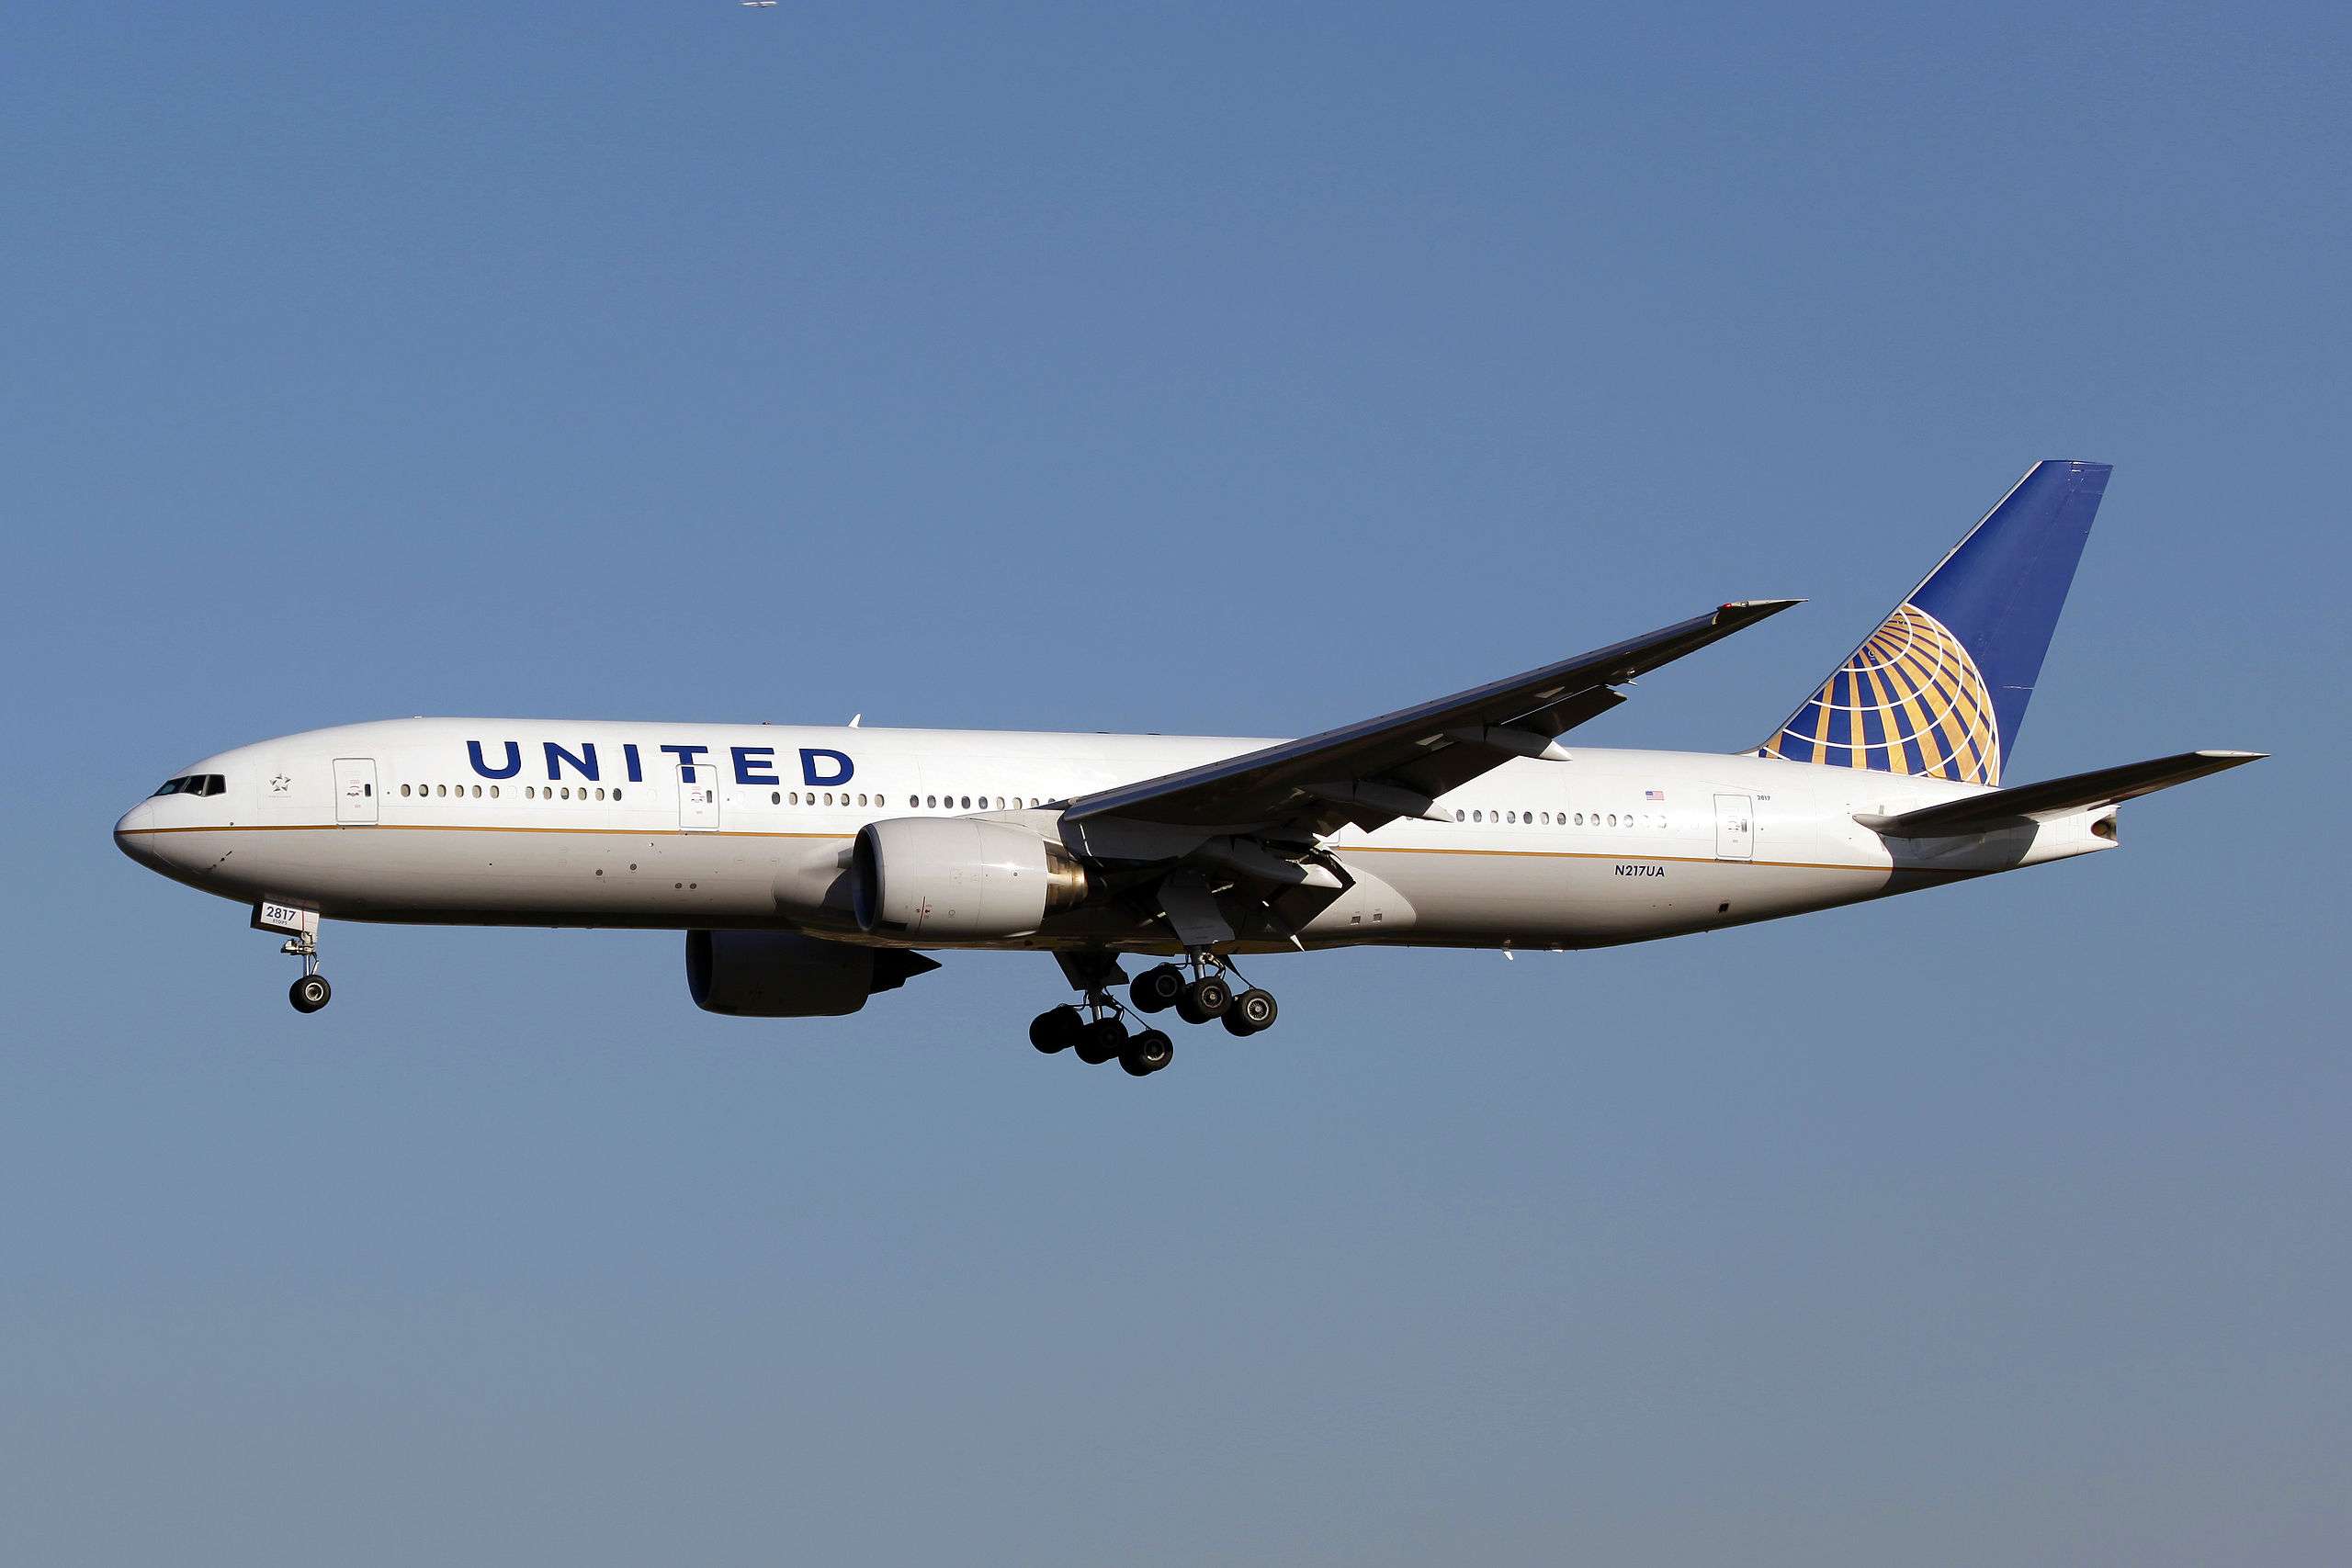 Crew Blamed For United Flight That Nearly Crashed in Maui